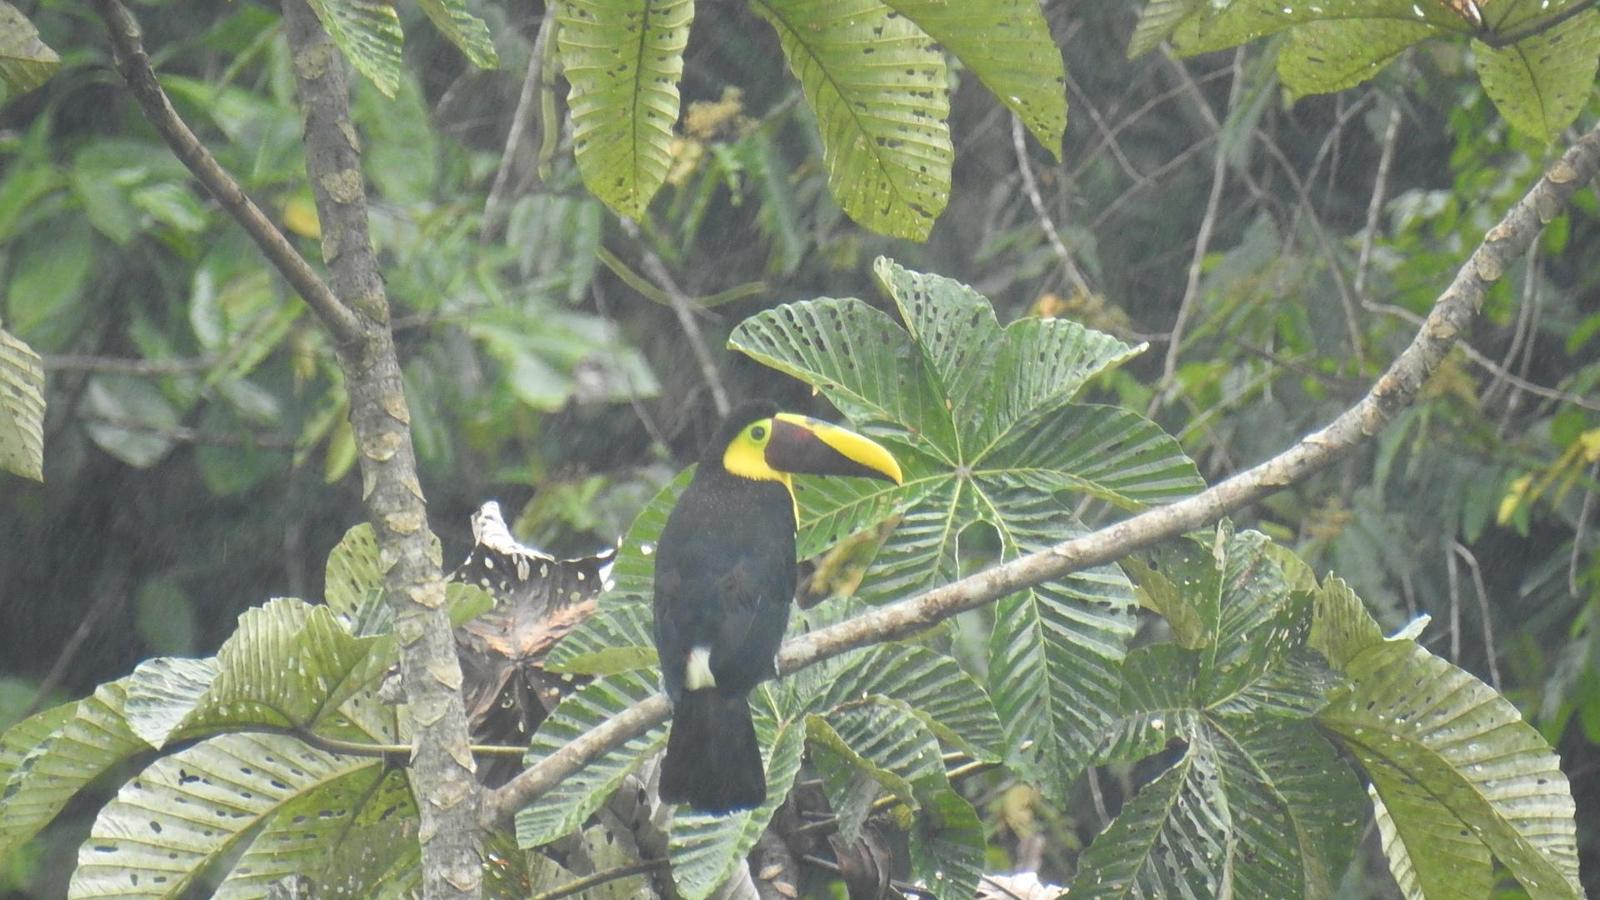 Yellow-throated Toucan (Chestnut-mandibled) Photo by Julio Delgado